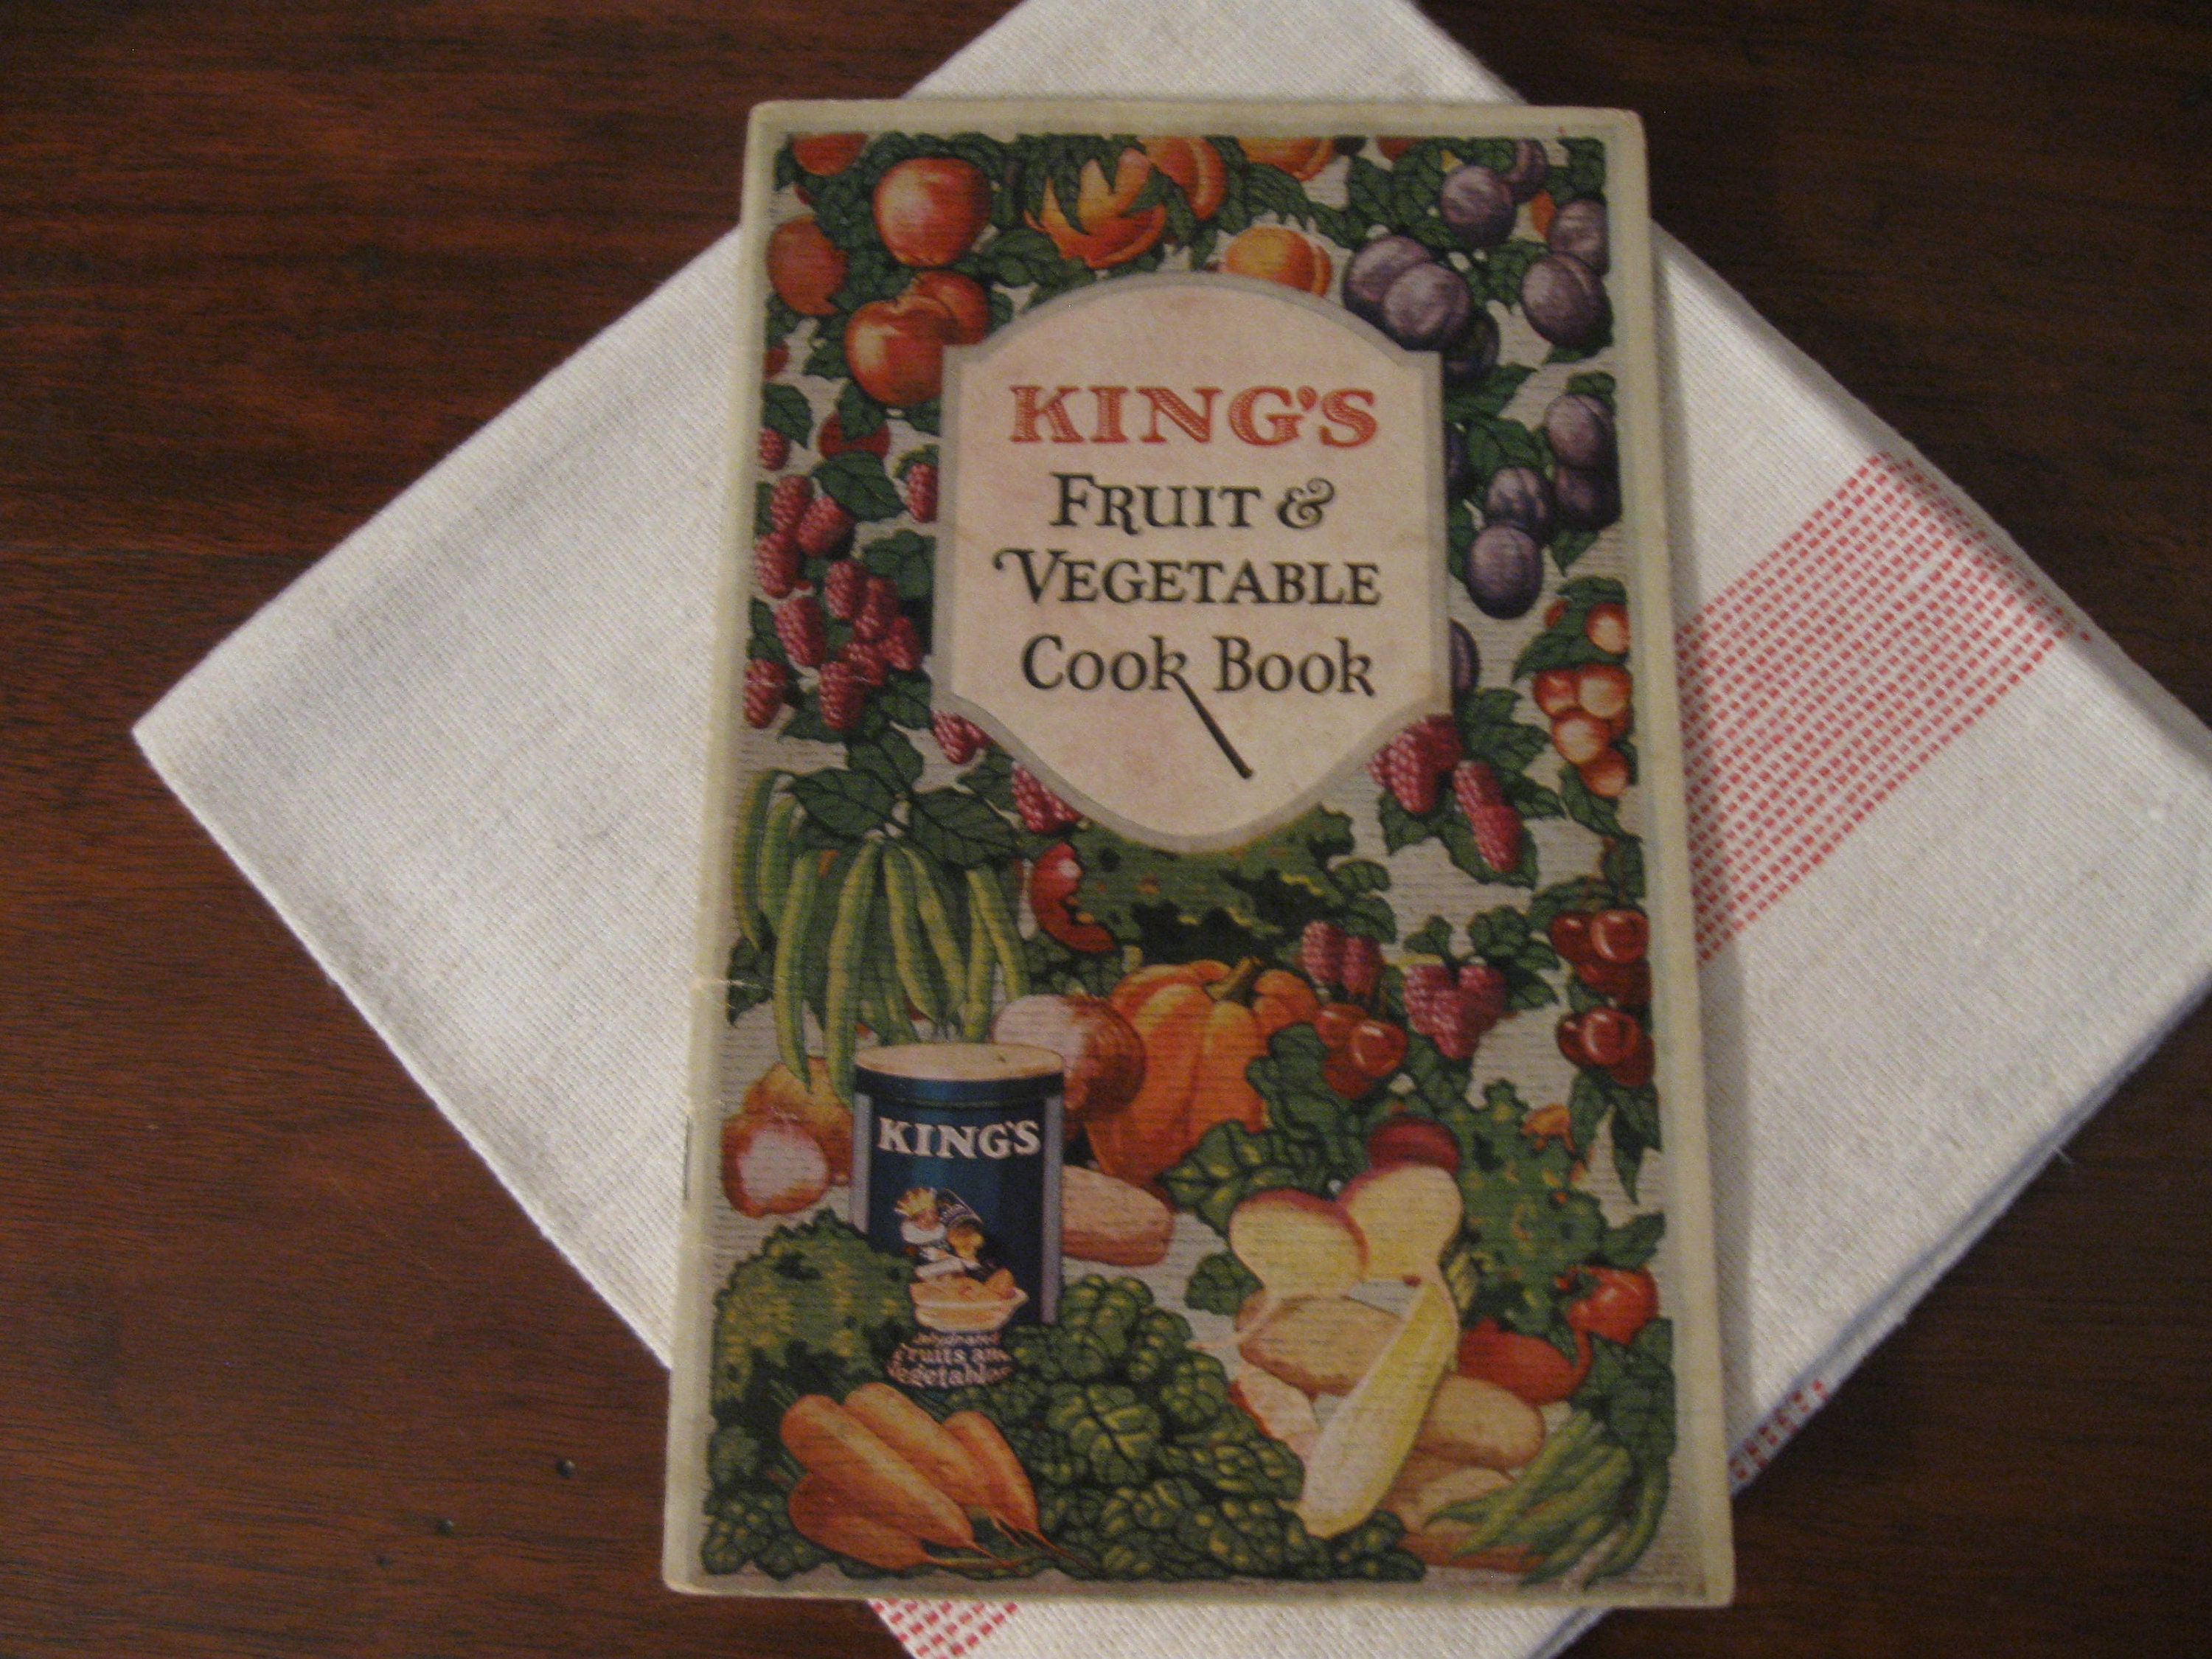 King's Fruit & Vegetable Cook Book 1929 Recipe Booklet 64 Pages Vg Condition Farmhouse Display Collectible Old Recipes Advertising